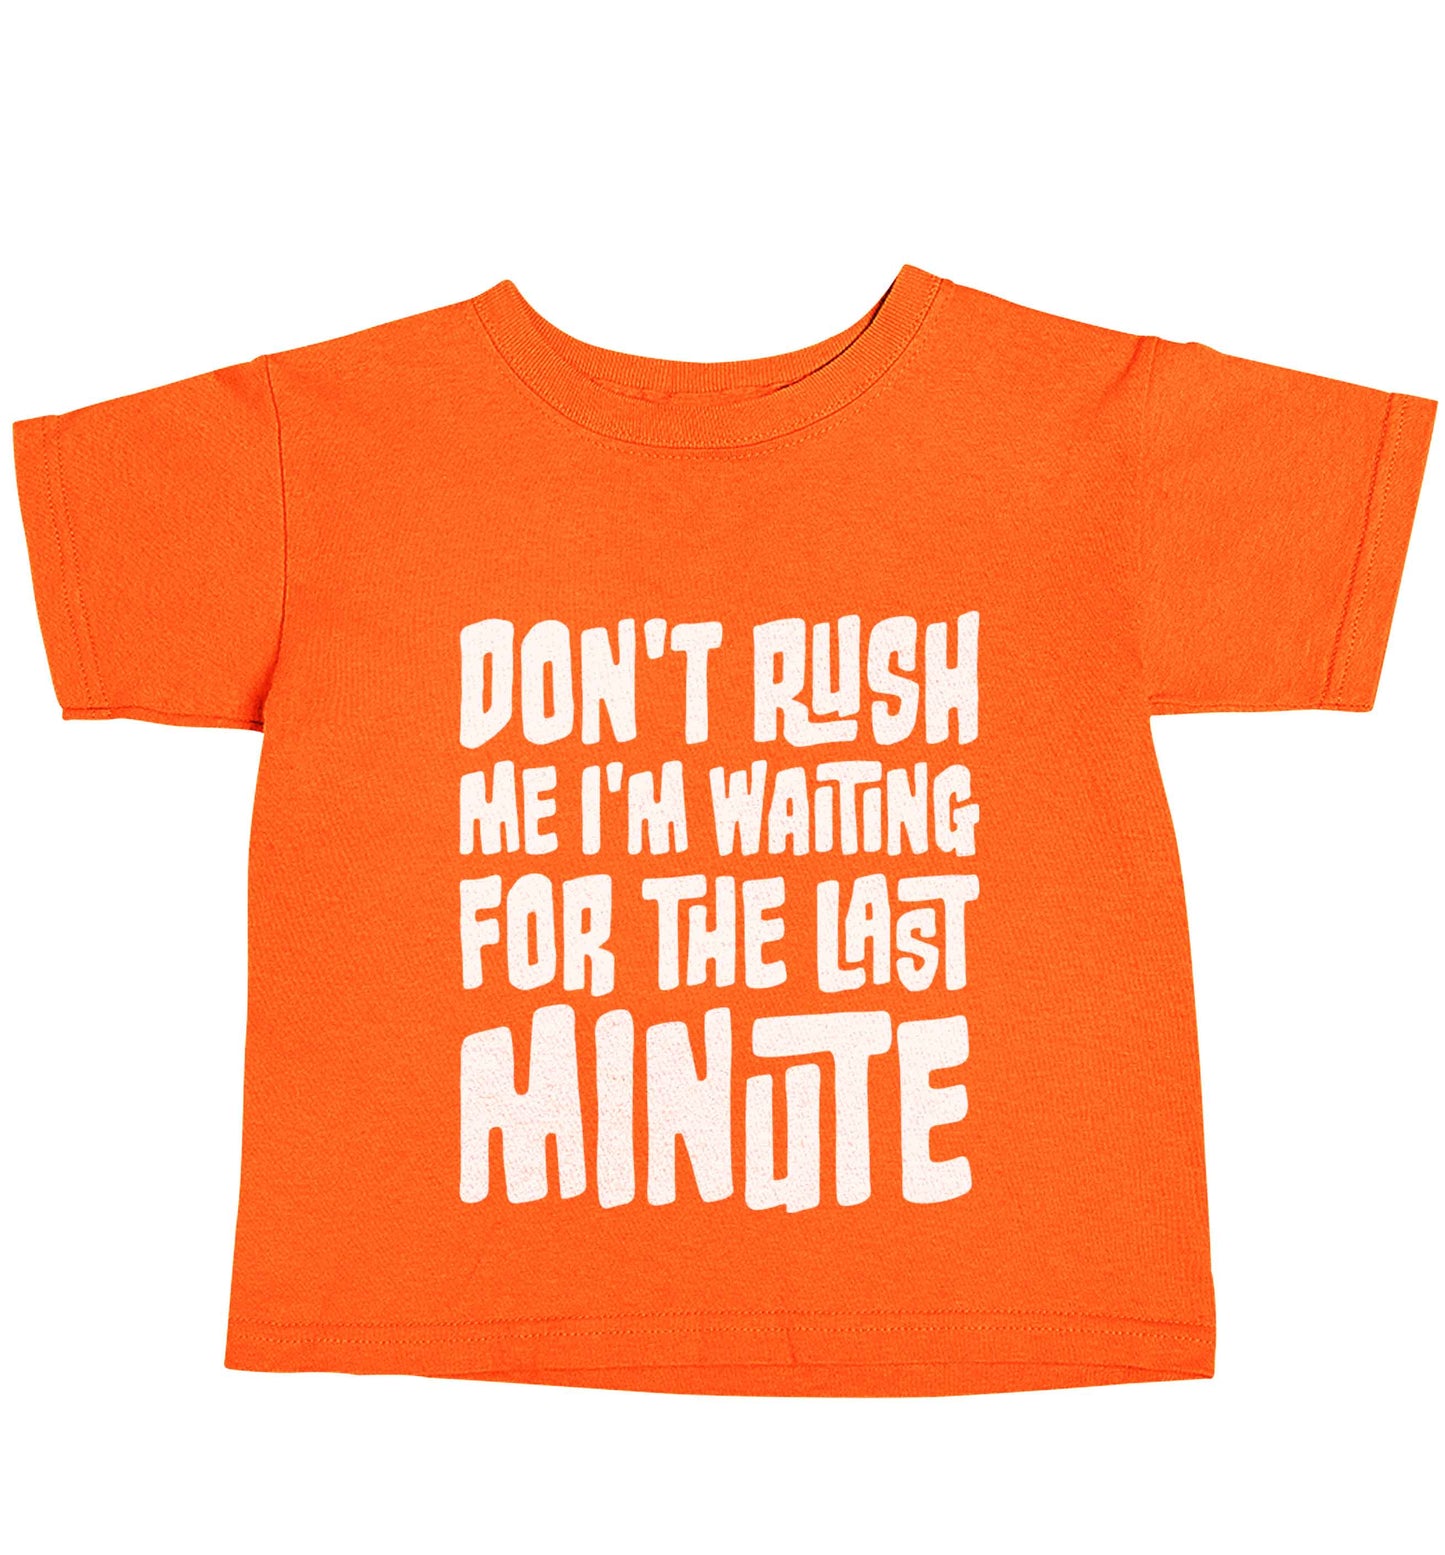 Don't rush me I'm waiting for the last minute orange baby toddler Tshirt 2 Years